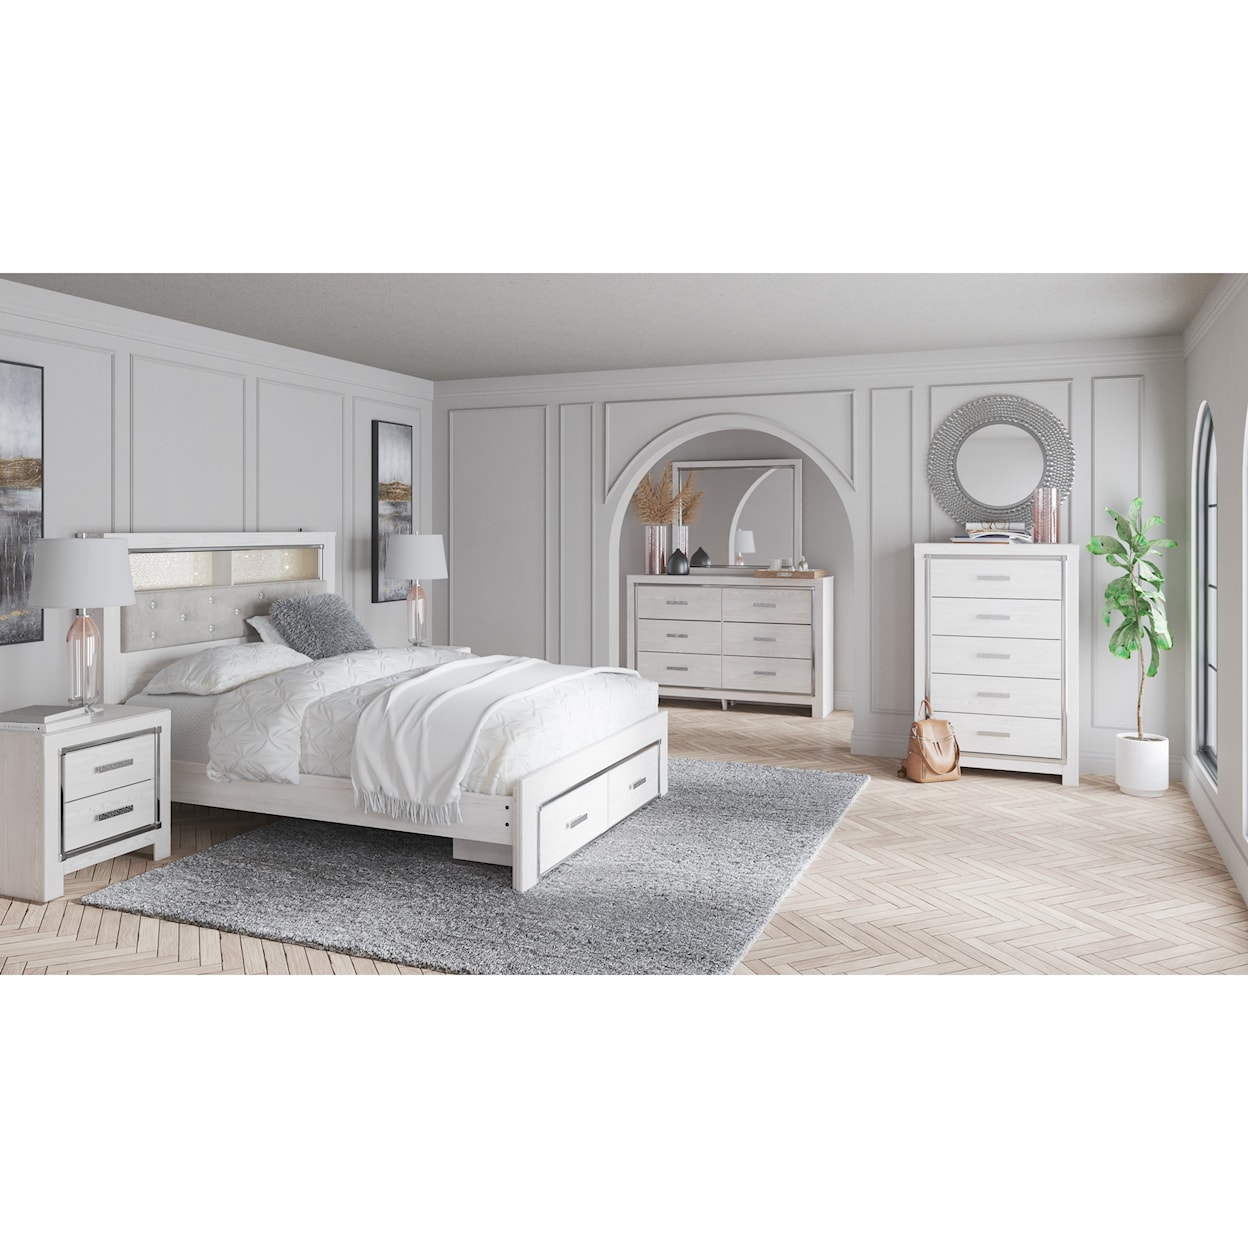 Ashley Signature Design Altyra Queen Bedroom Group